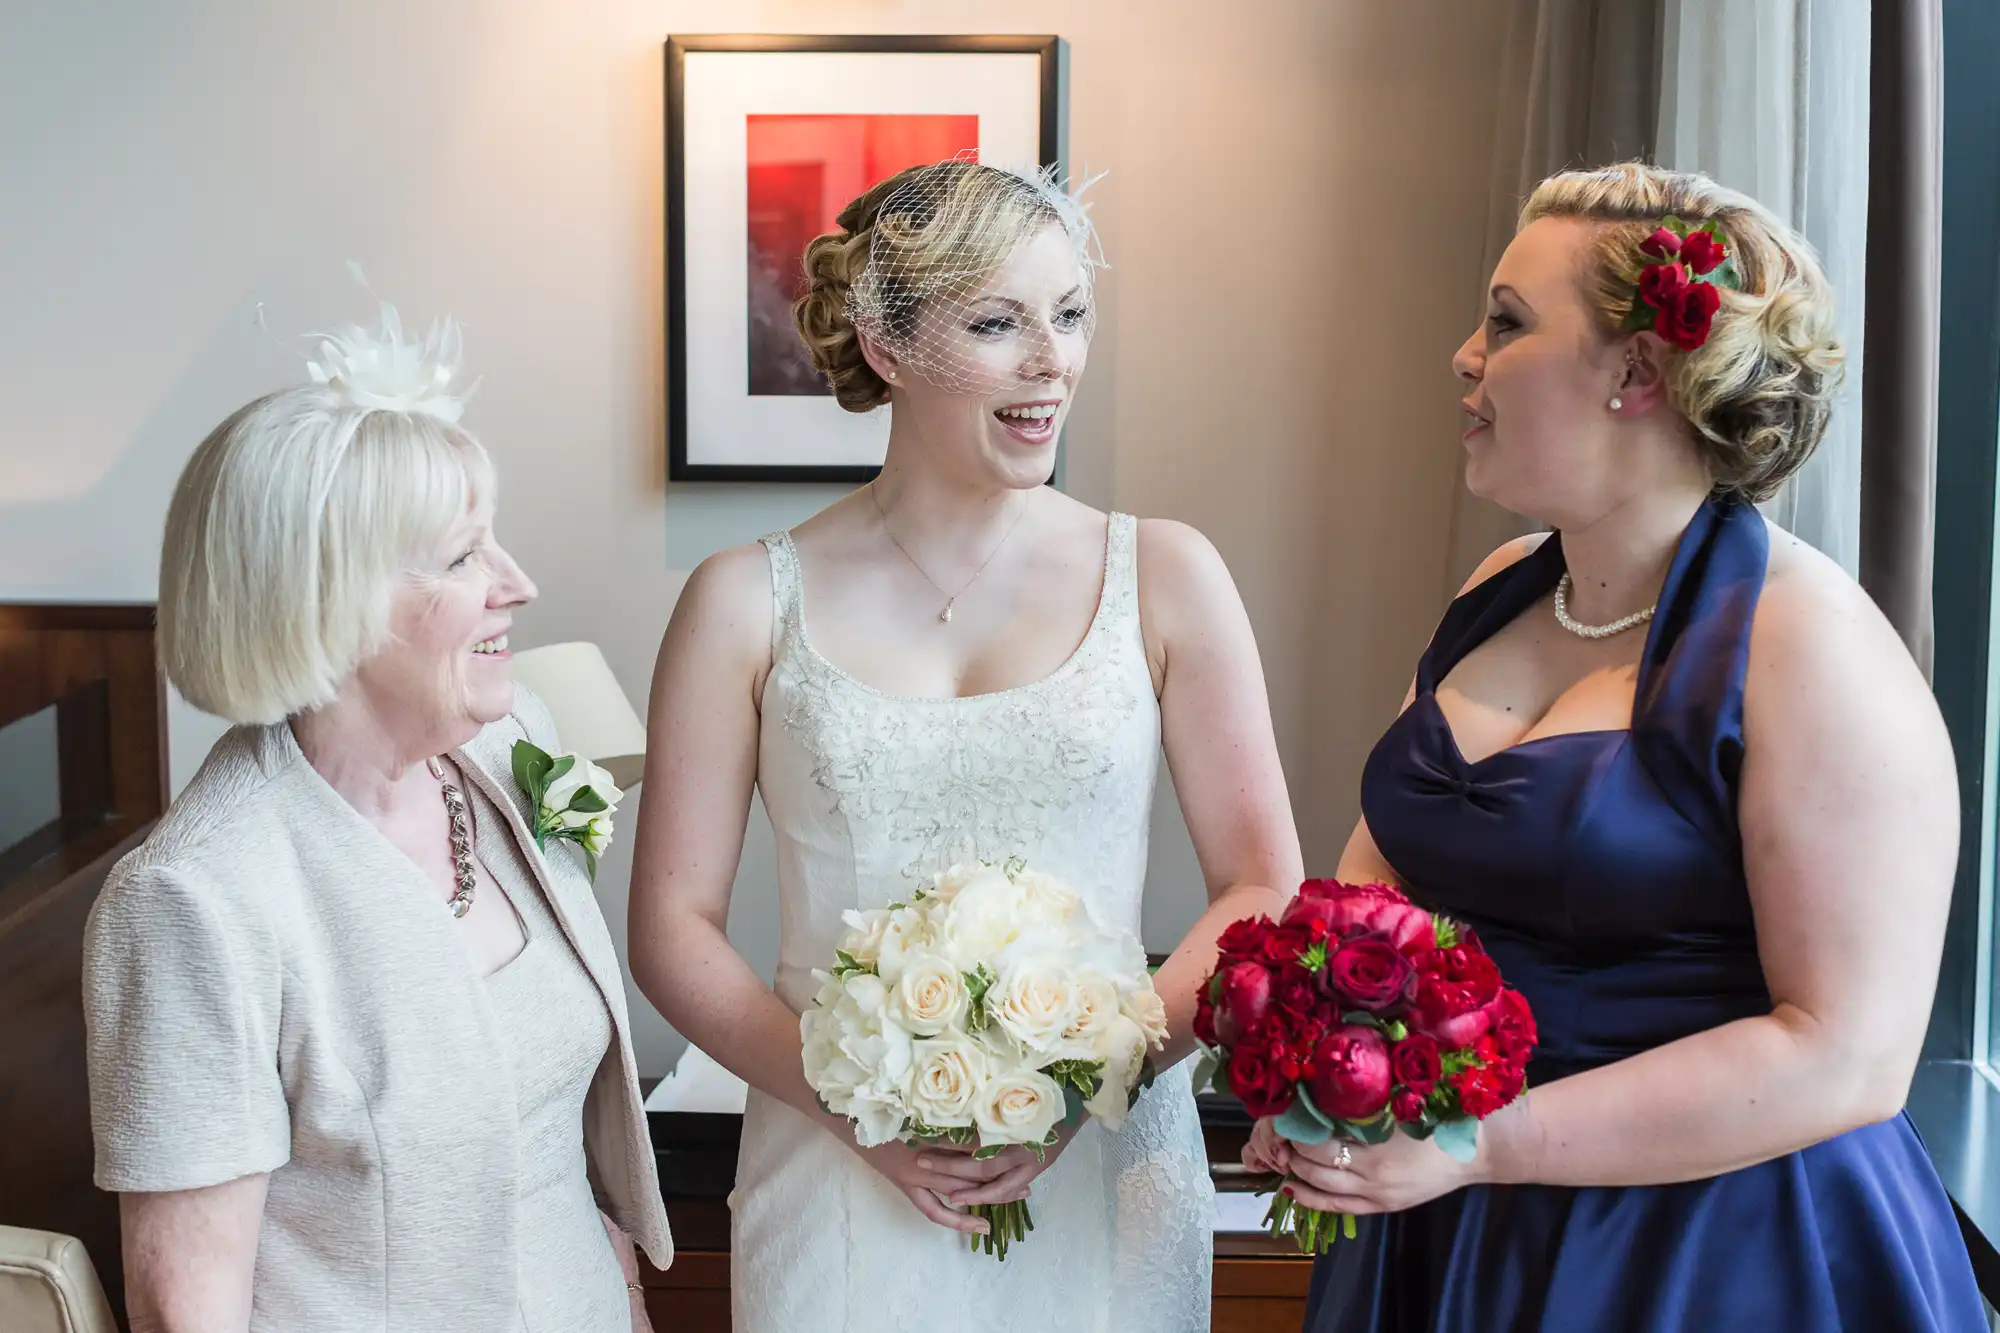 Three women at a wedding smiling and talking, with the bride in the center holding a bouquet of white roses and the other two holding red roses.